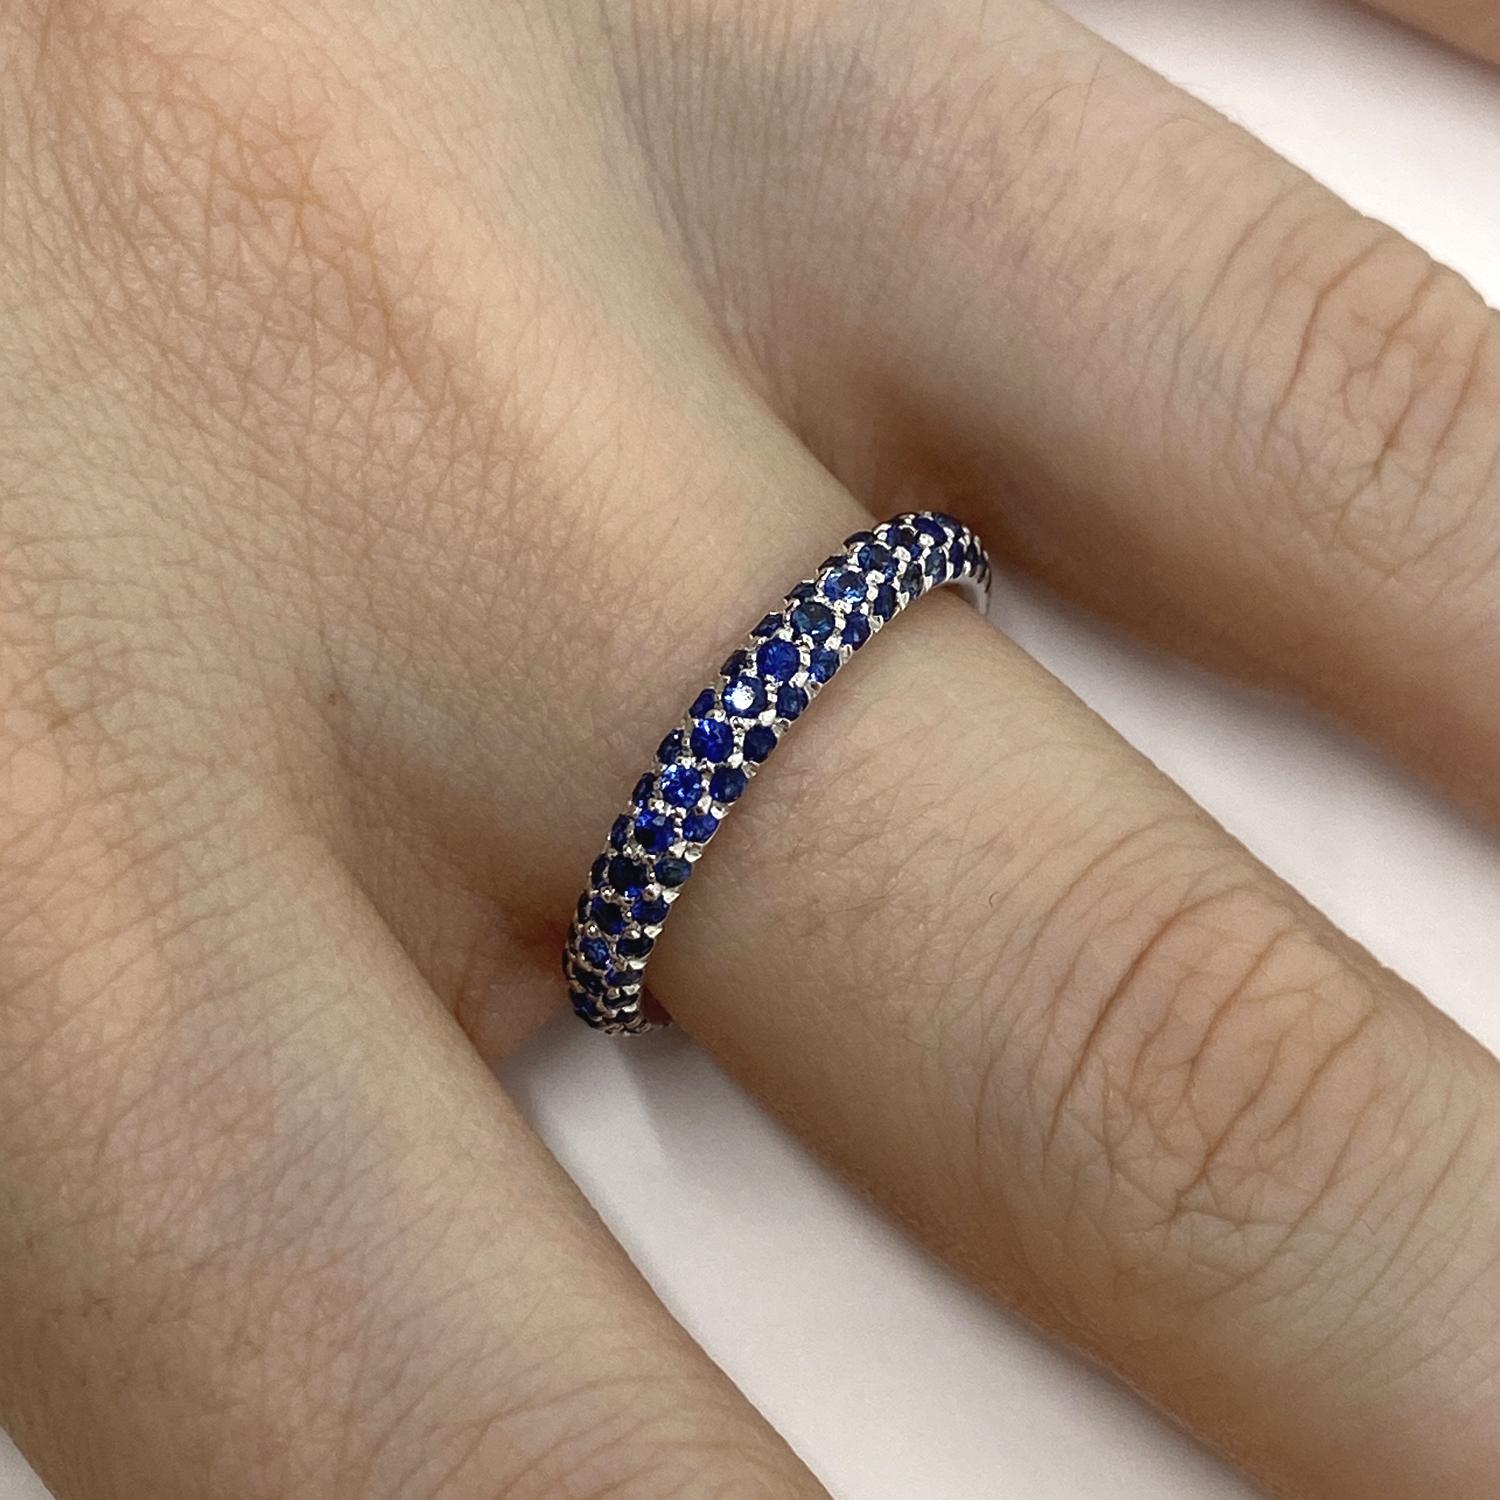 Ring made of 18kt white gold with natural blue sapphires for ct .1.55

Welcome to our jewelry collection, where every piece tells a story of timeless elegance and unparalleled craftsmanship. As a family-run business in Italy for over 100 years, we